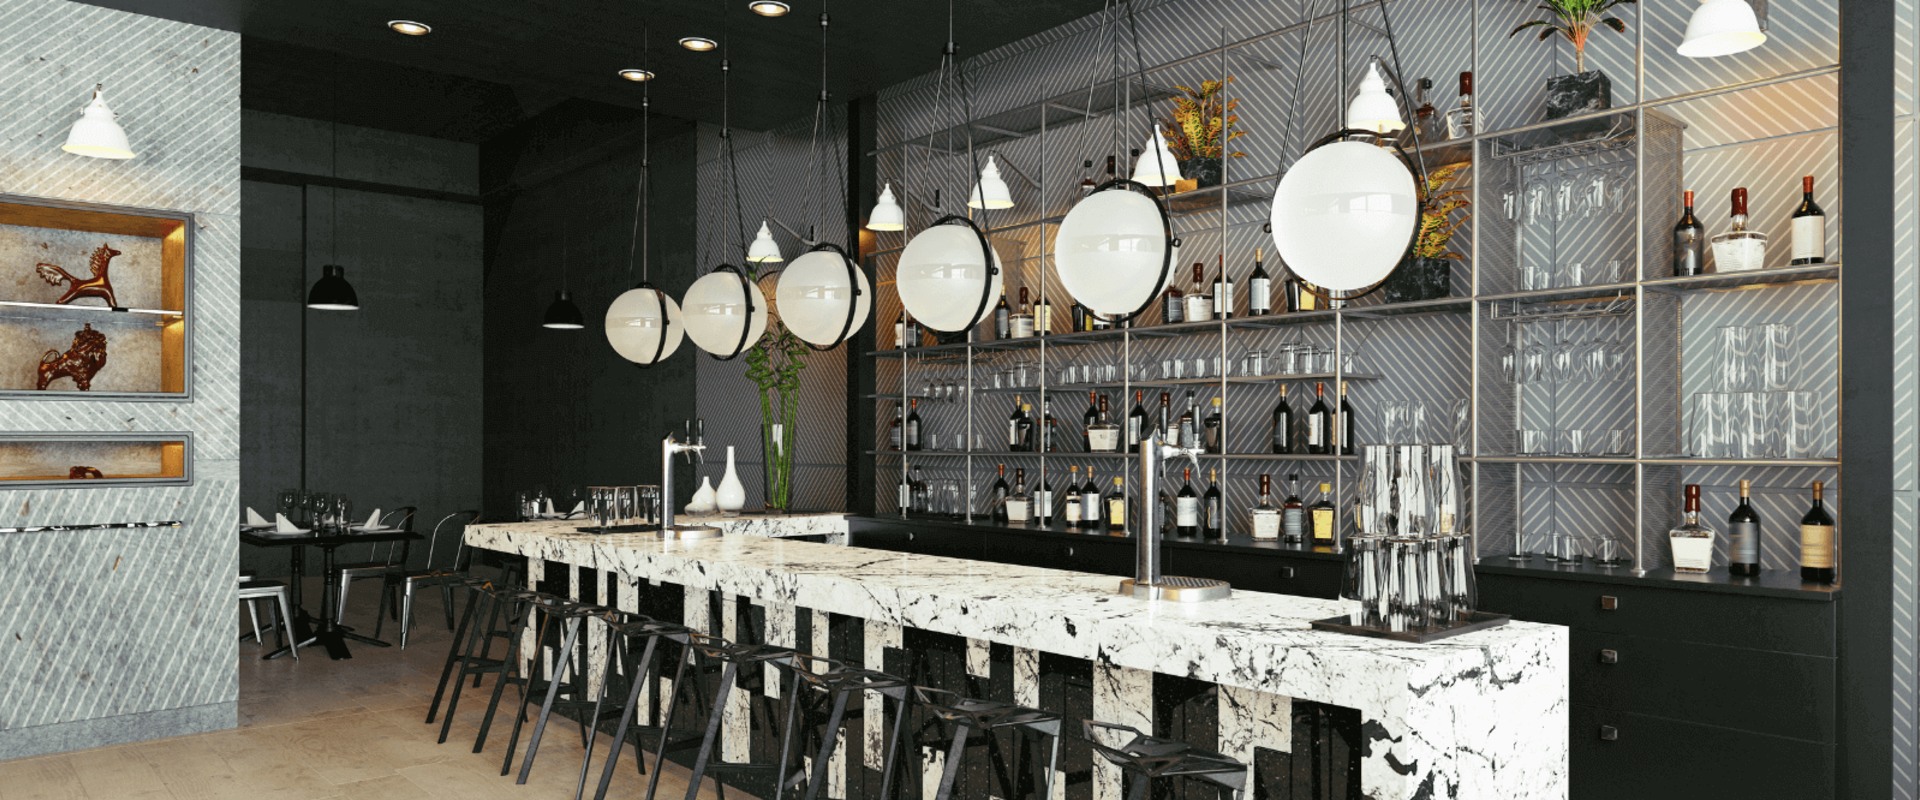 Stand Out with Unique Bar Decor and Accessories